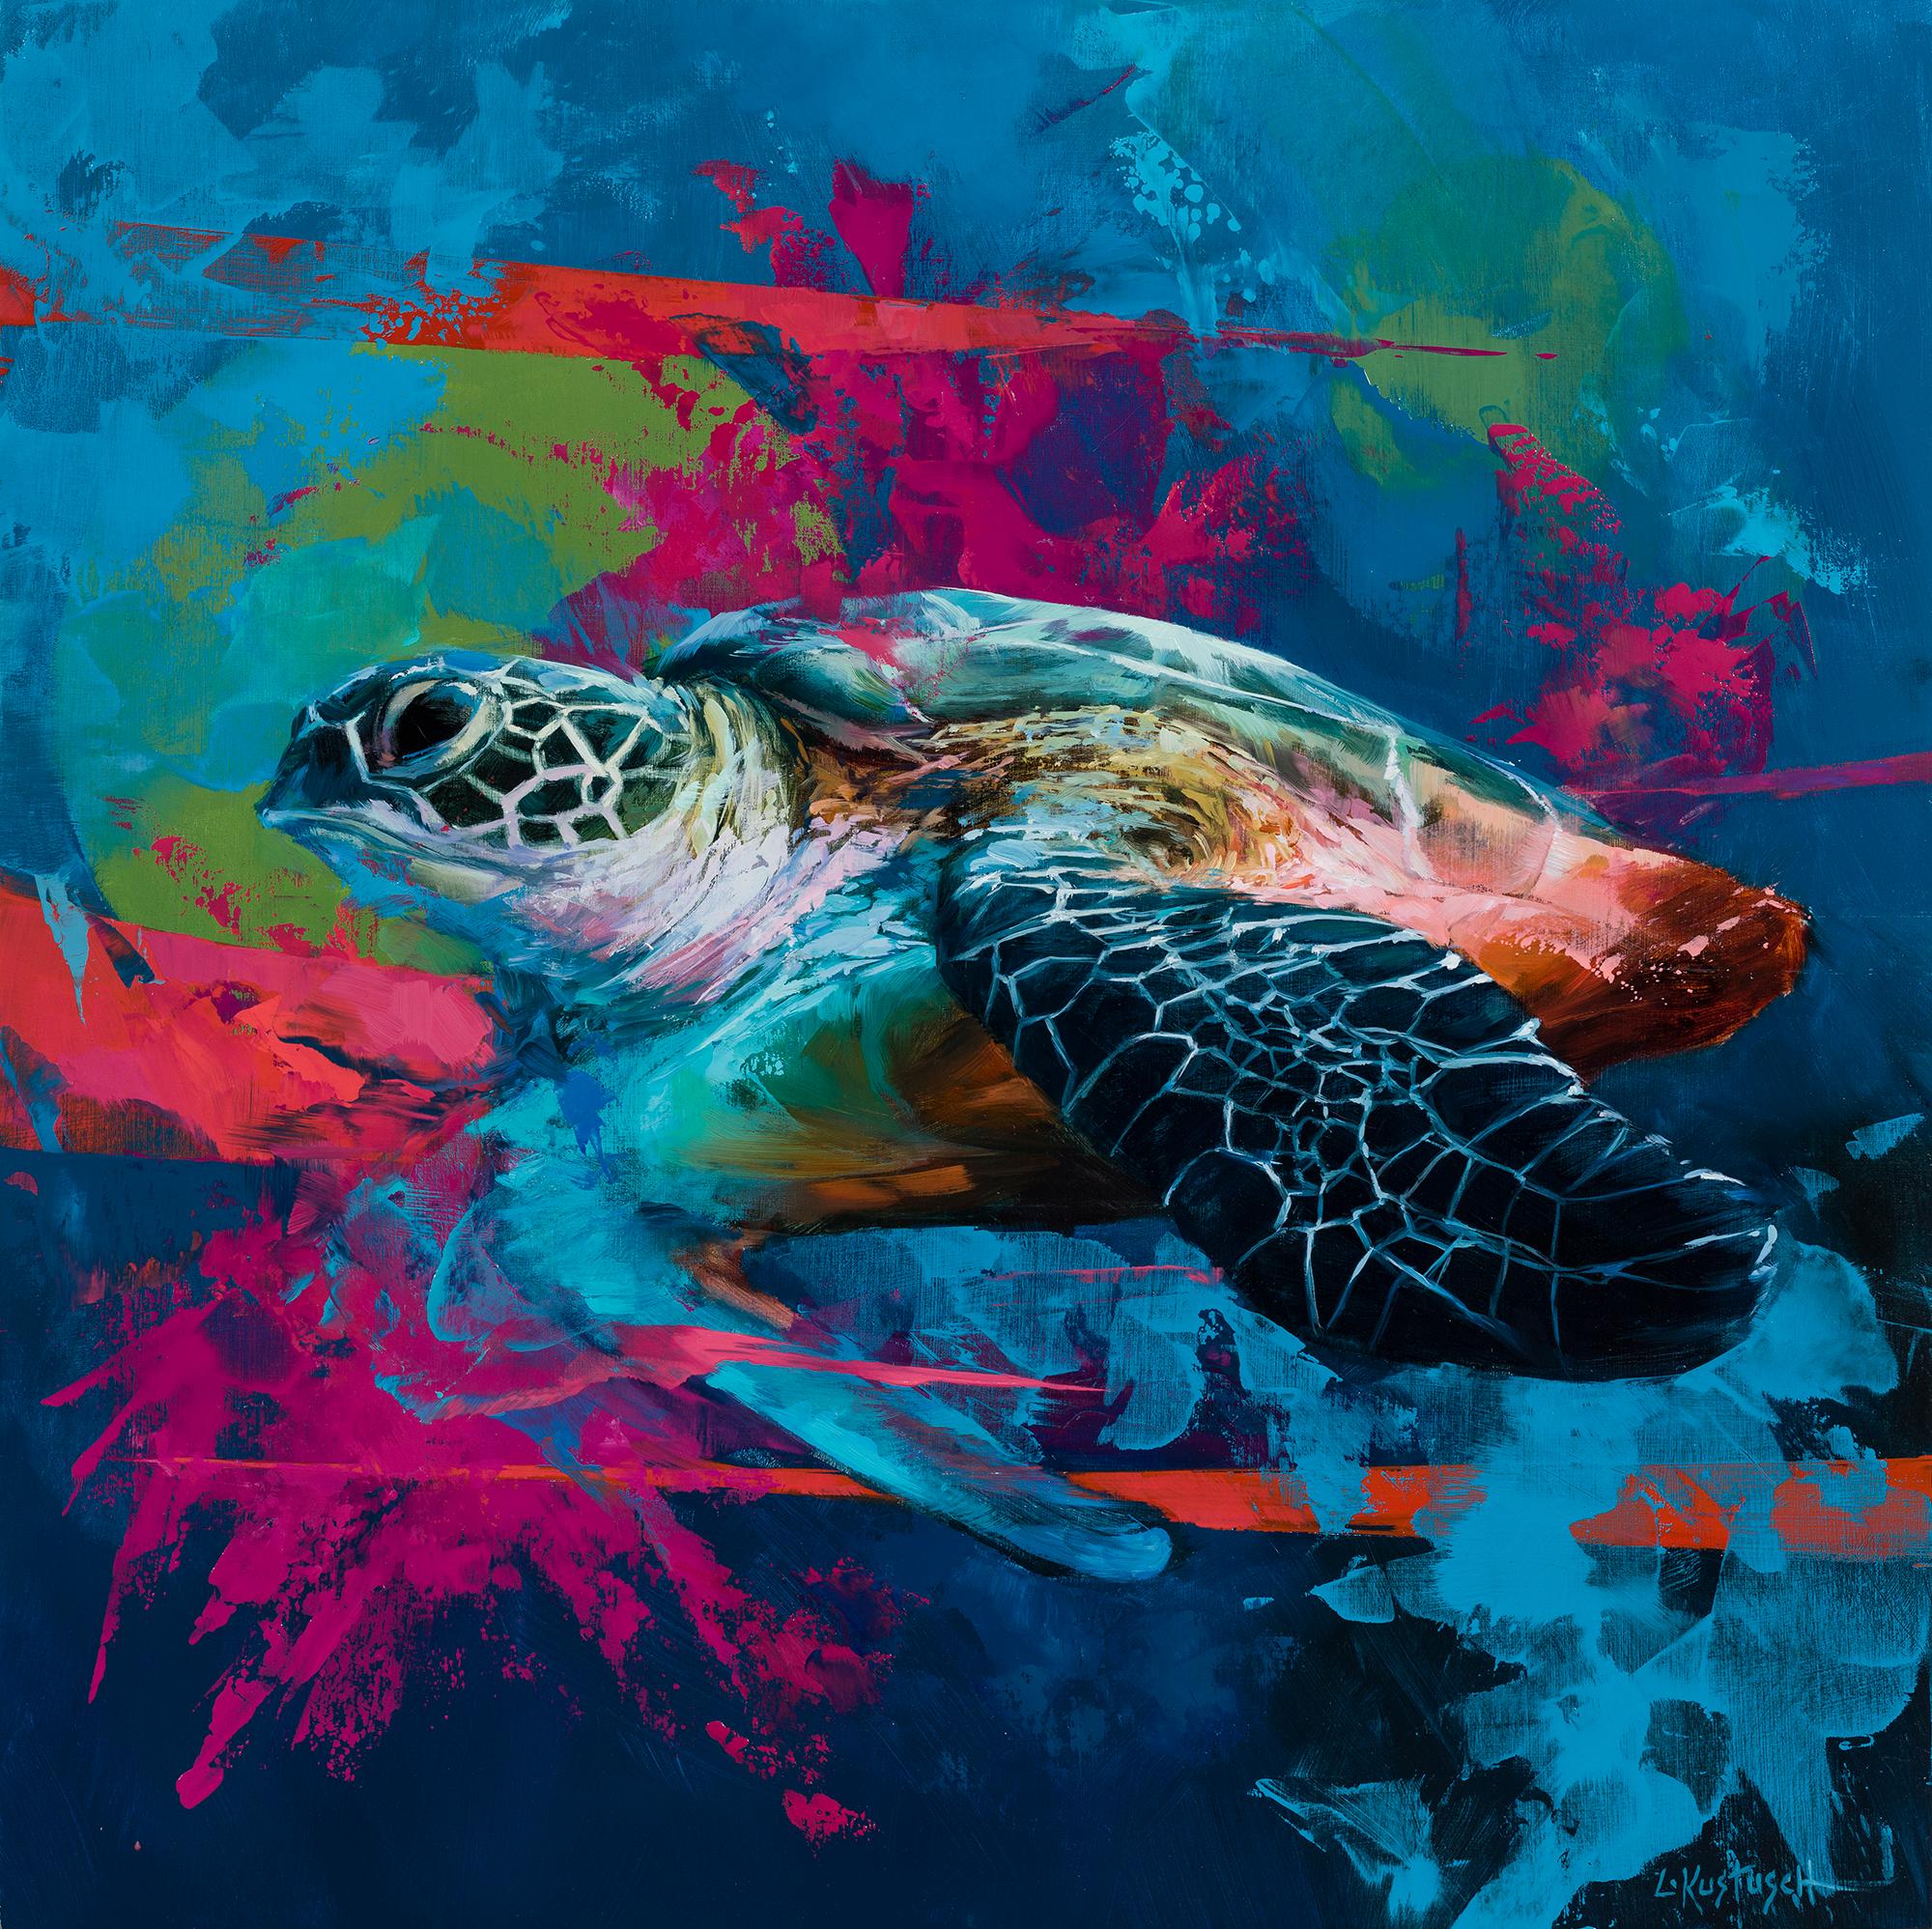 "The Green Sea Turtle" Animal Themed Oil Painting